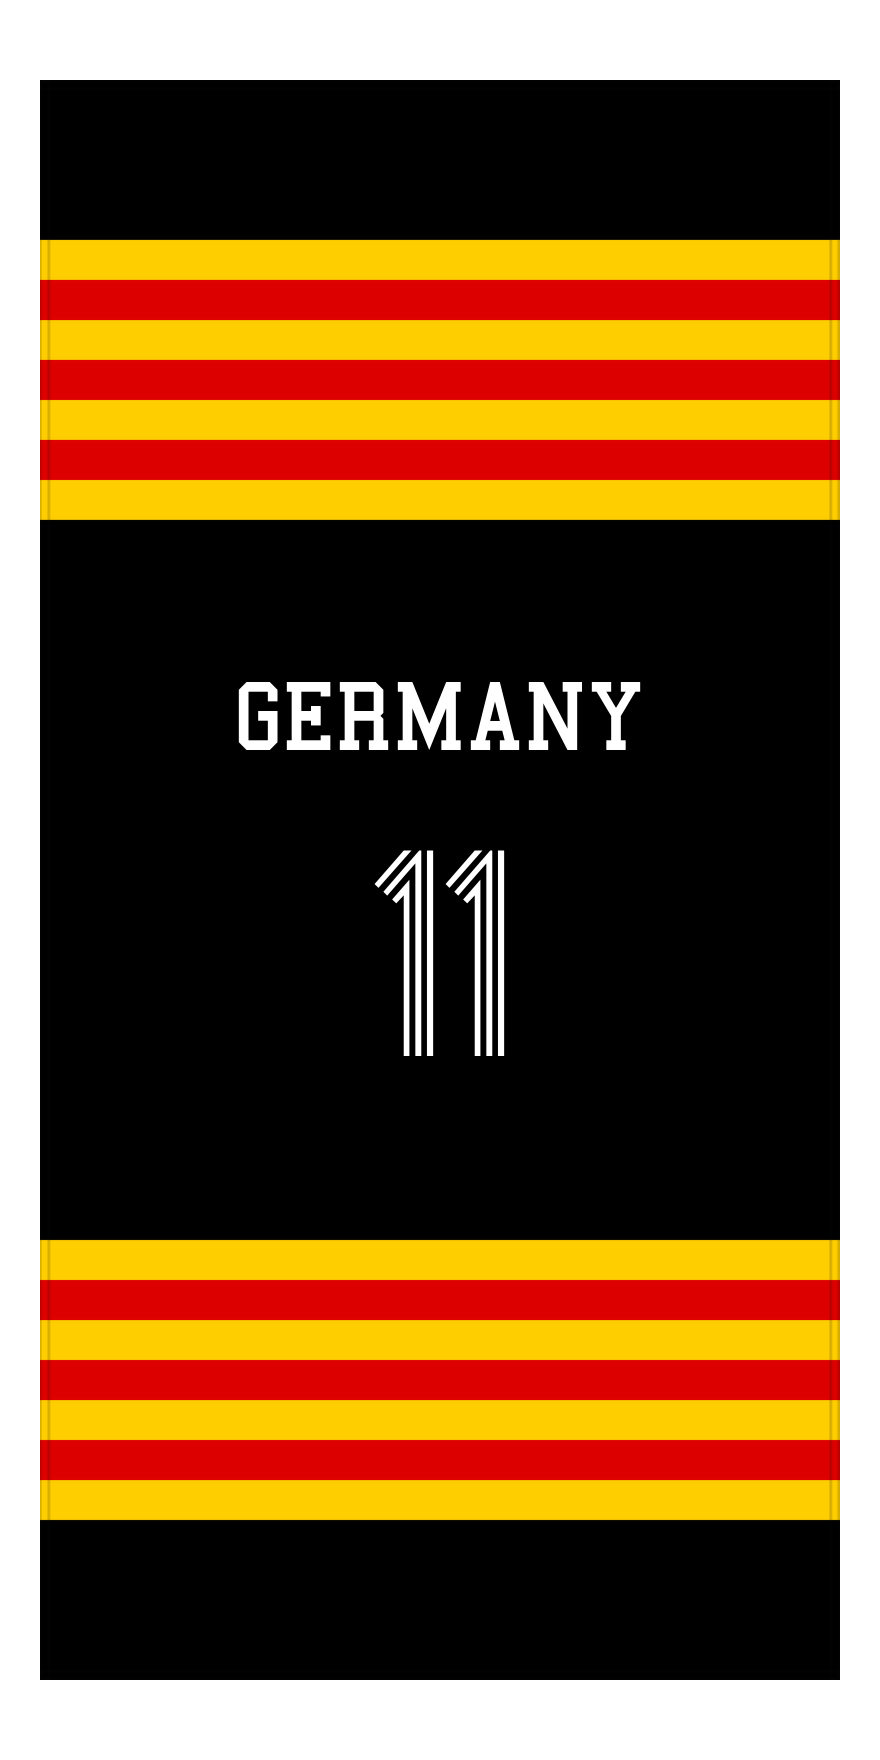 Personalized Jersey Number 3-on-1 Stripes Sports Beach Towel - Germany - Vertical Design - Front View